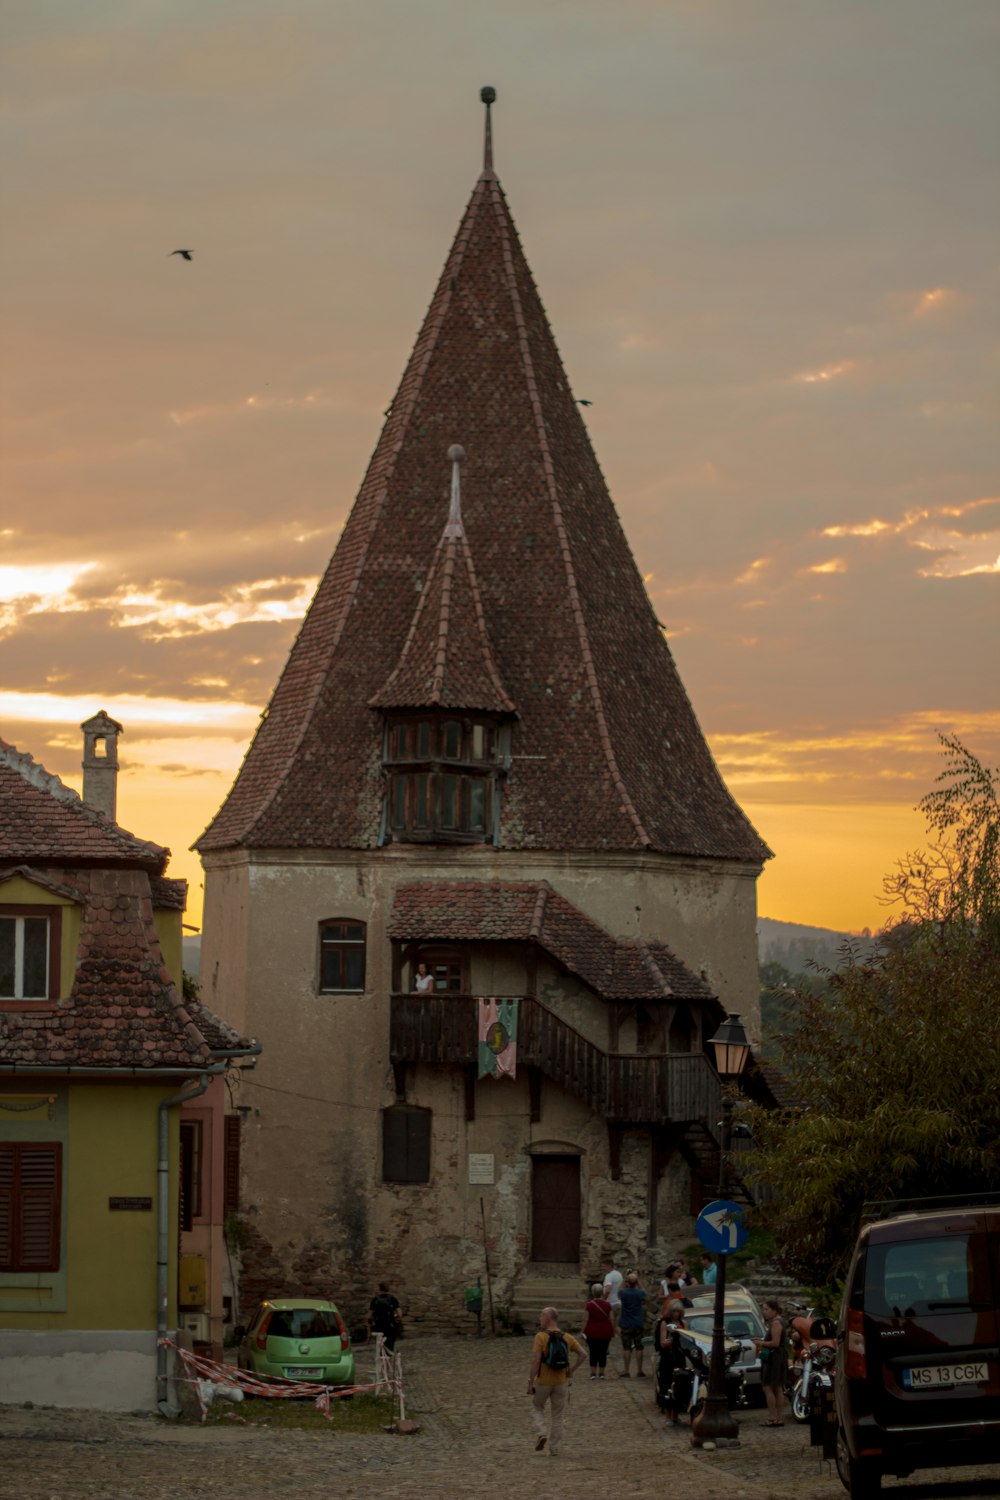 an old building with a tower with a clock on it